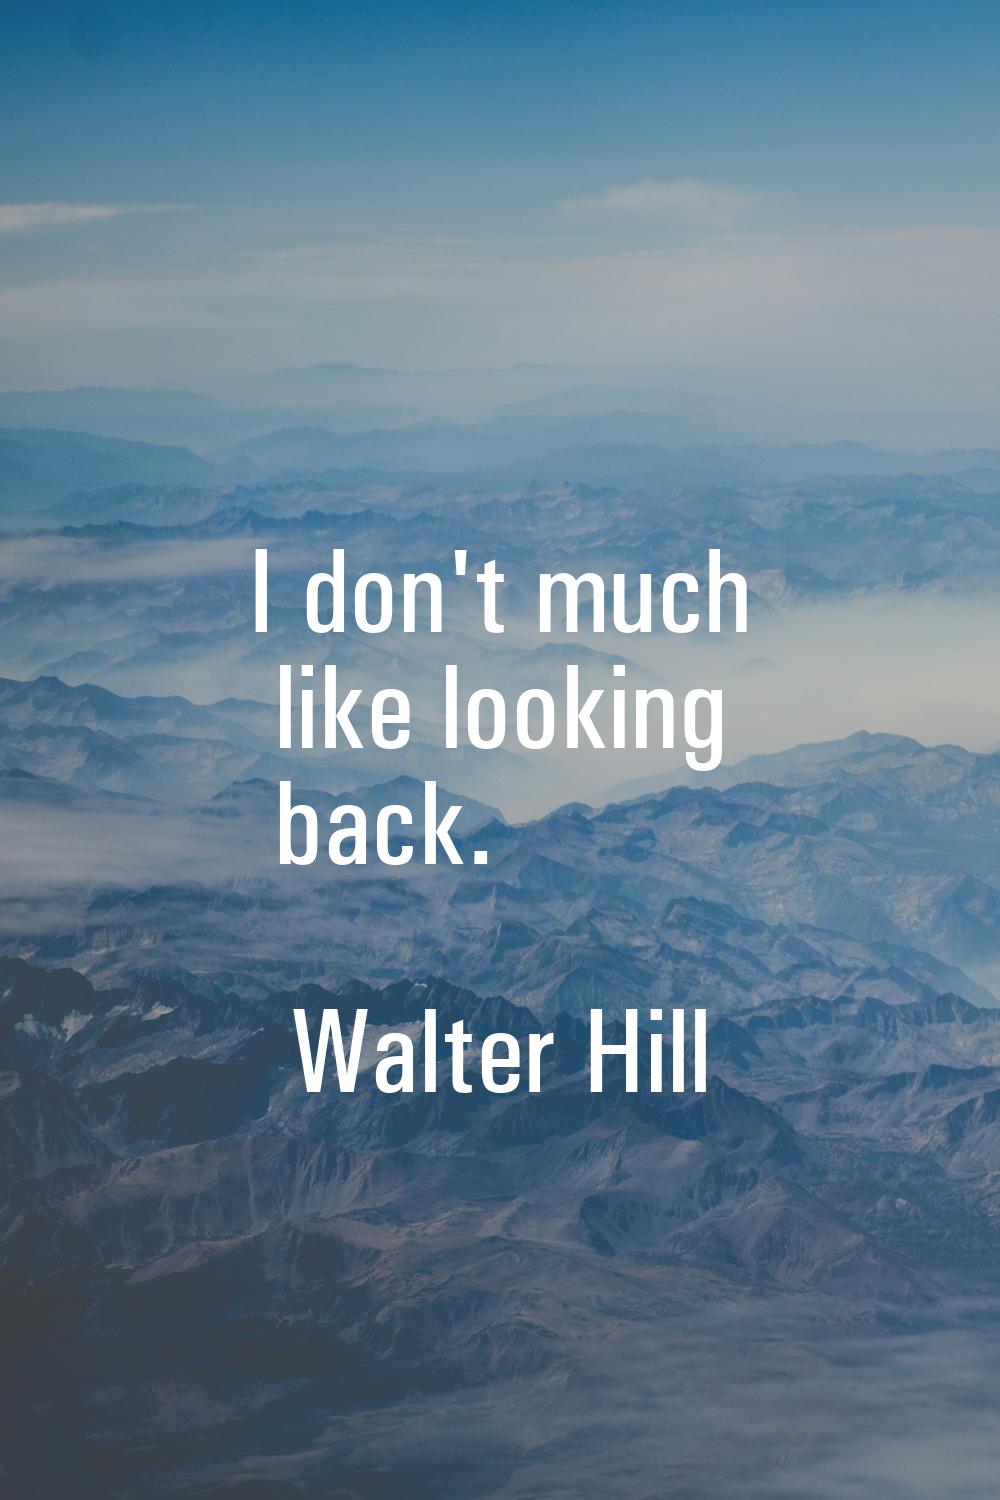 I don't much like looking back.